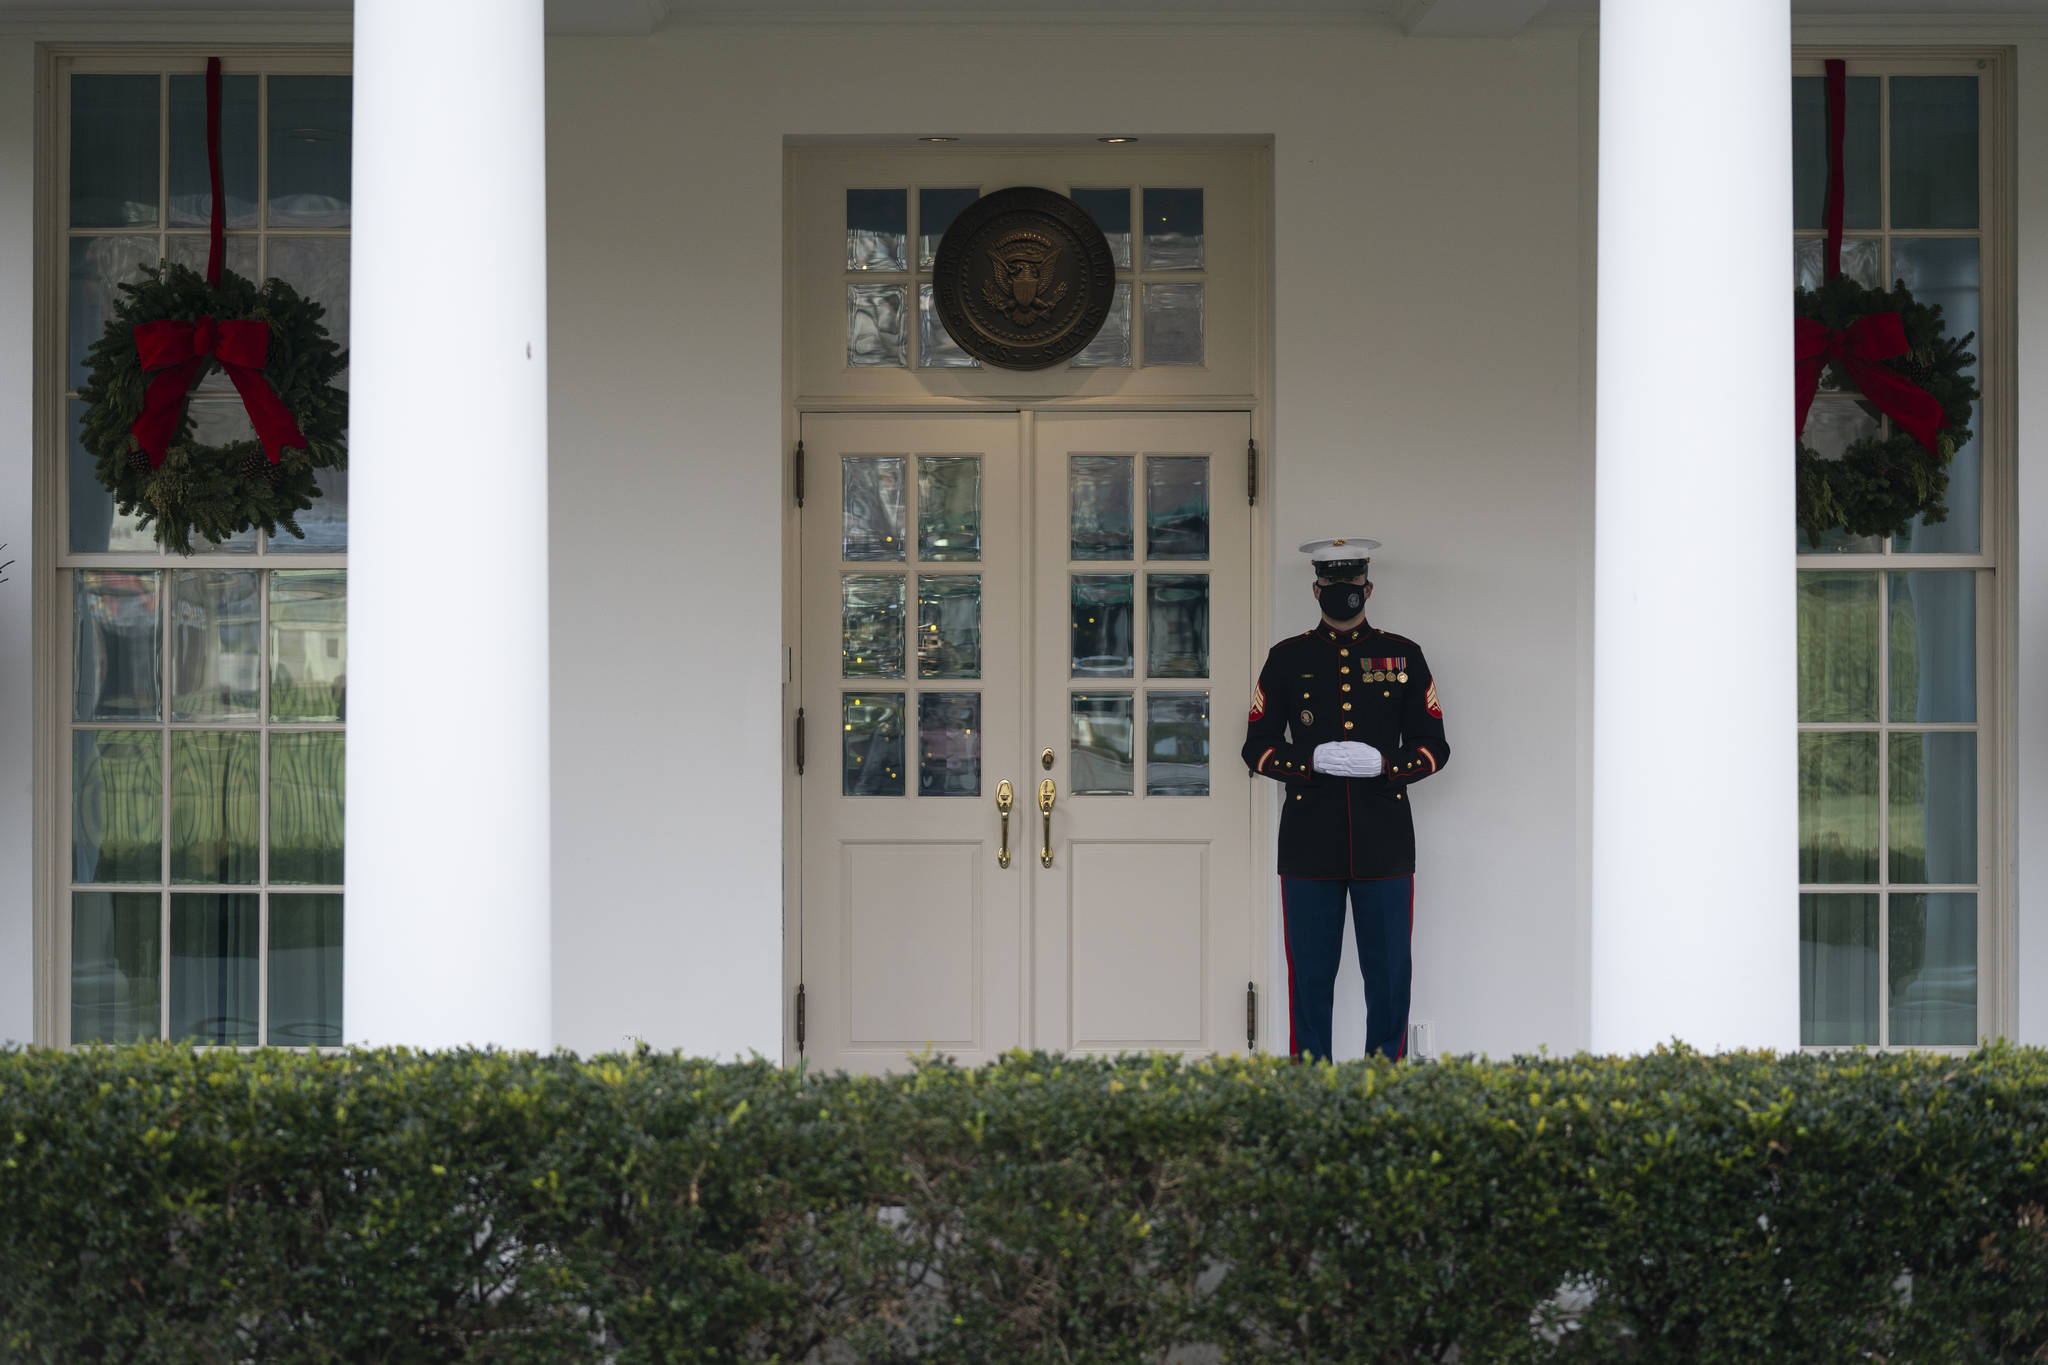 AP Photo / Evan Vucci
A Marine stands outside the entrance to the West Wing of the White House on Monday, signifying the President is in the Oval Office.